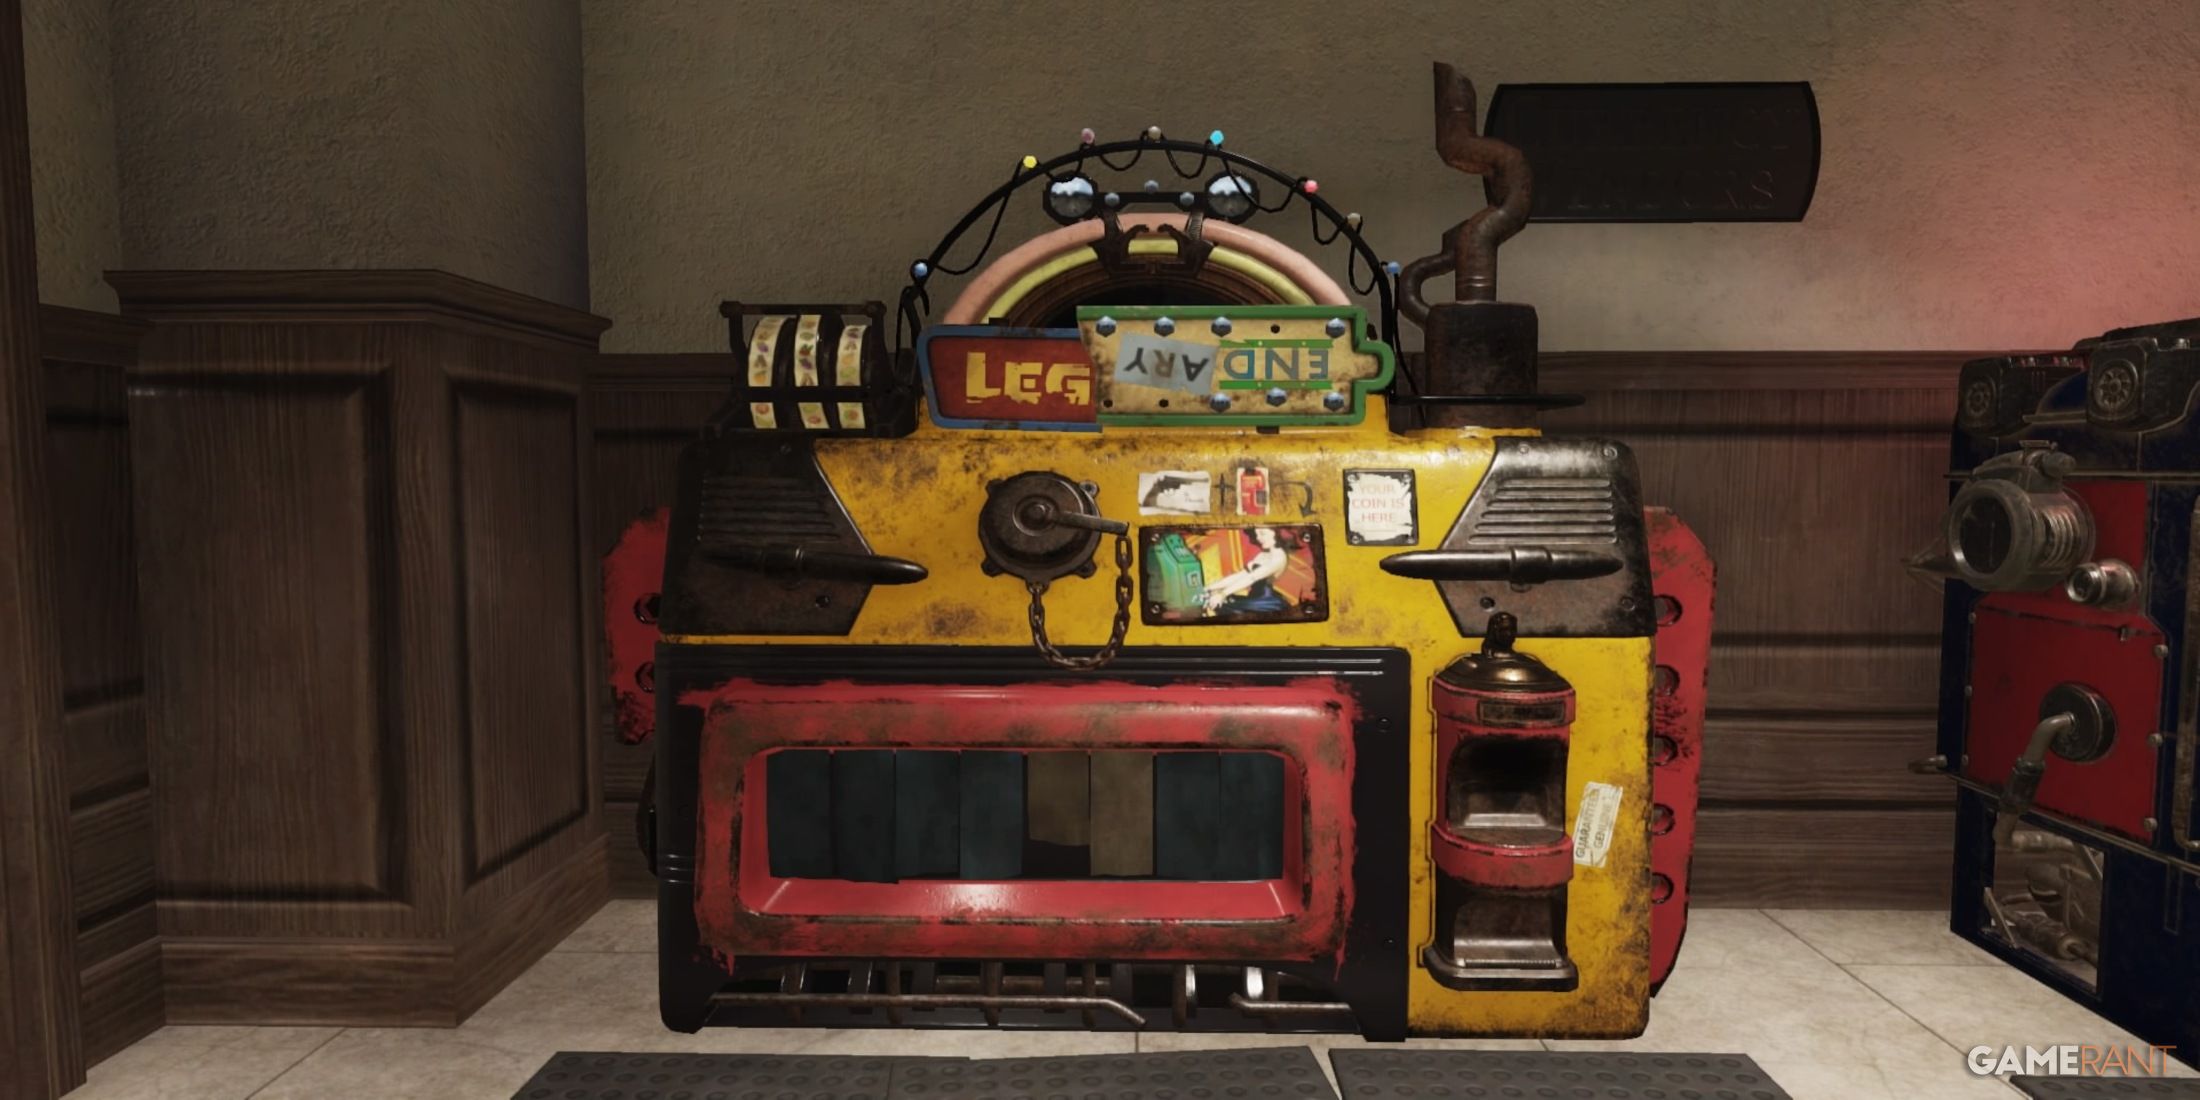 Legendary Exchange Machine in Fallout 76